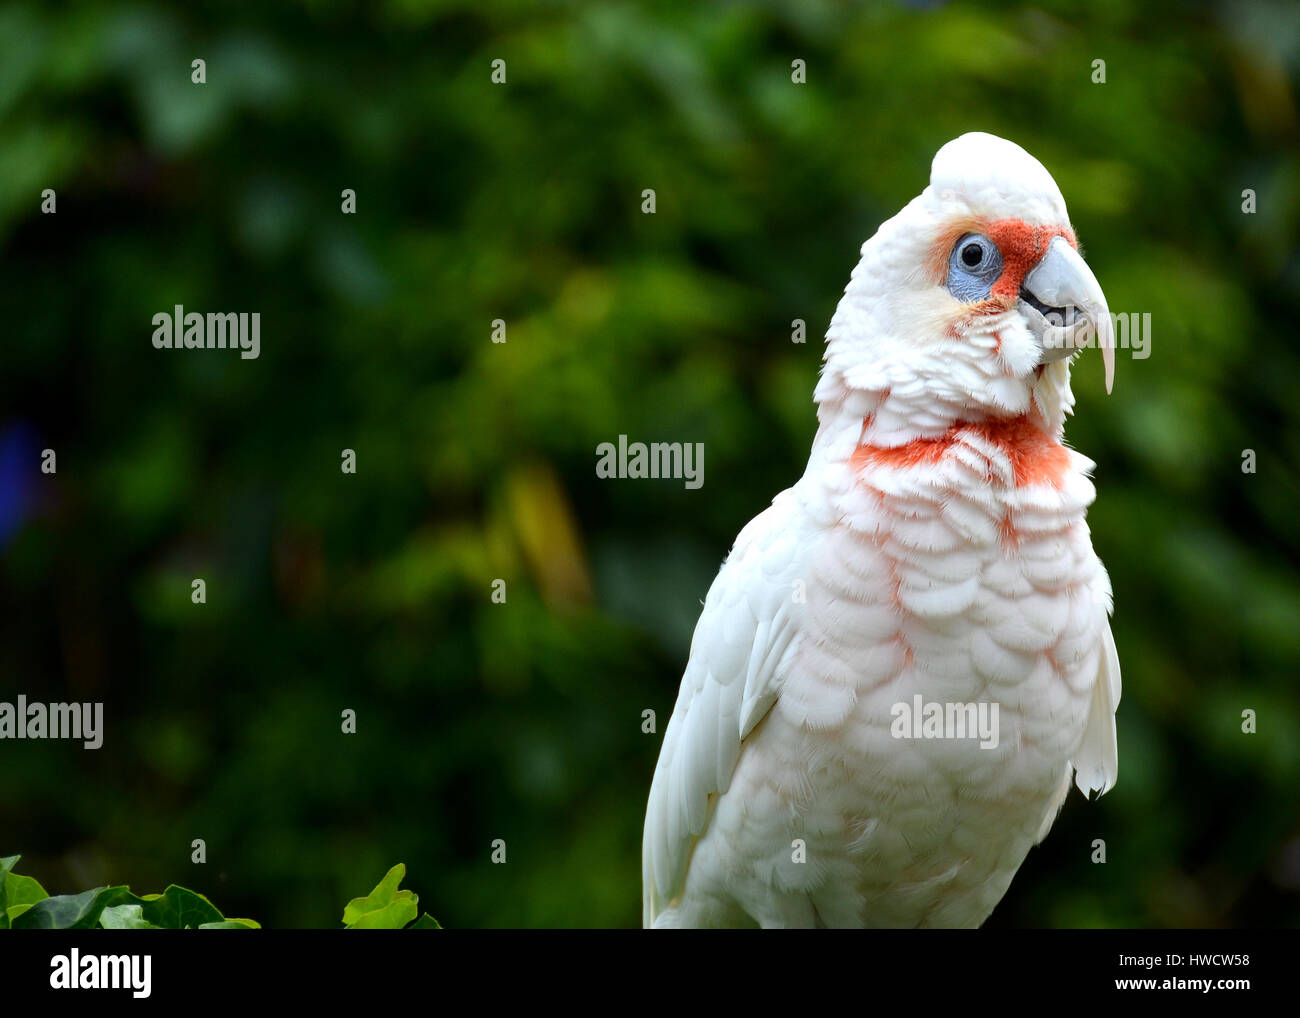 Long-billed Corella (cacatua tenuirostris). Portrait of a Catatua standing in a tree, isolated on green background forest. Stock Photo